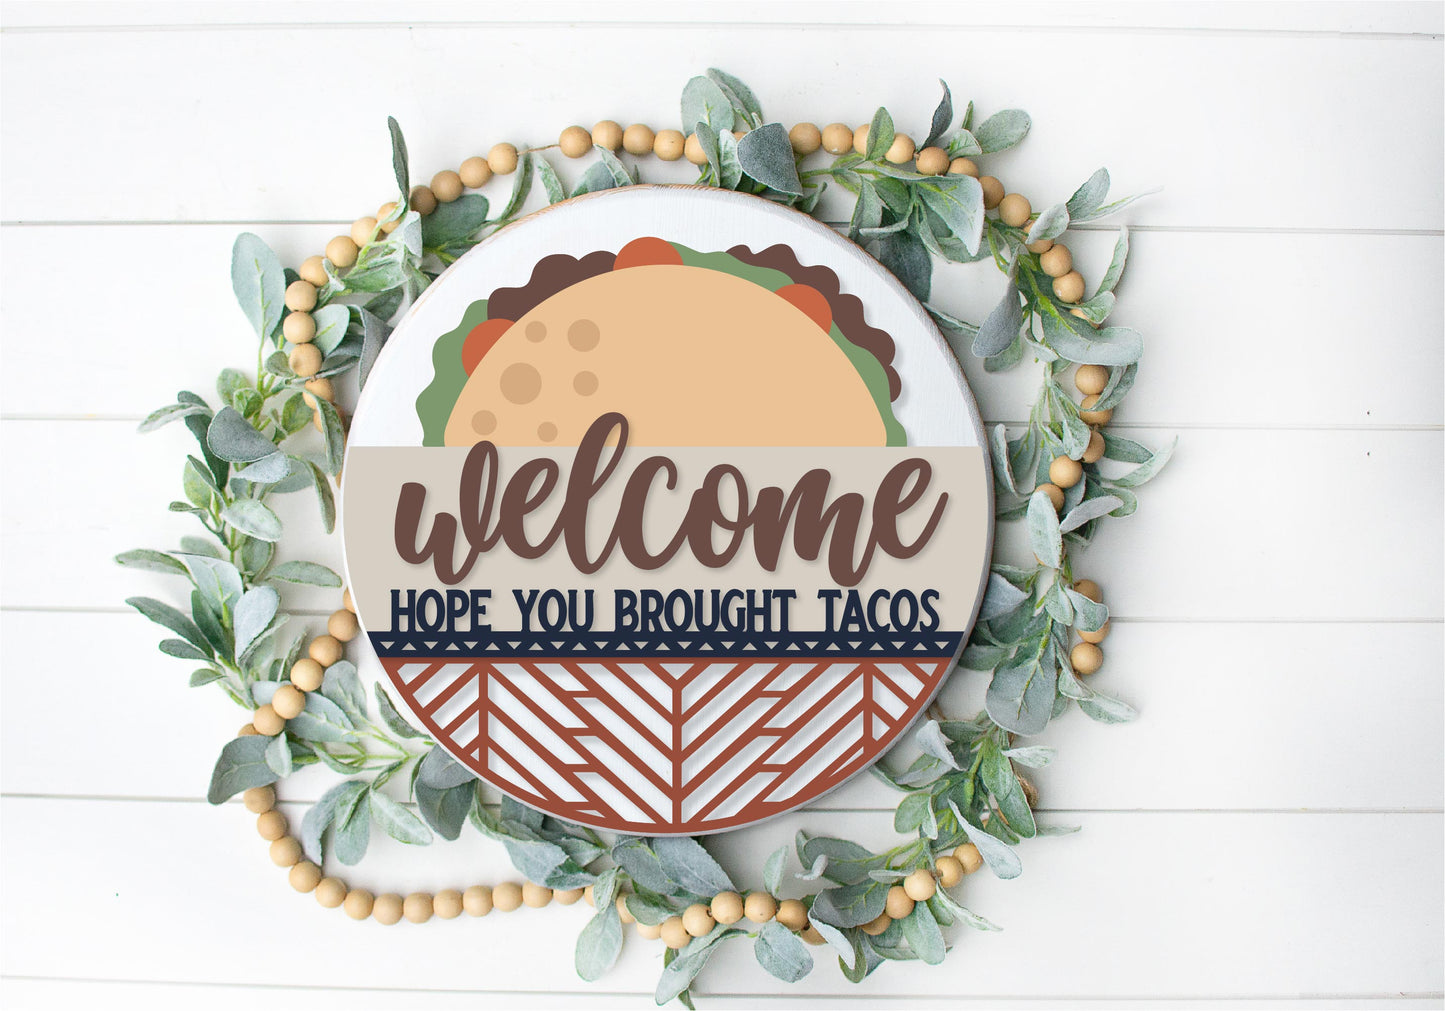 Welcome hope you brought tacos sign